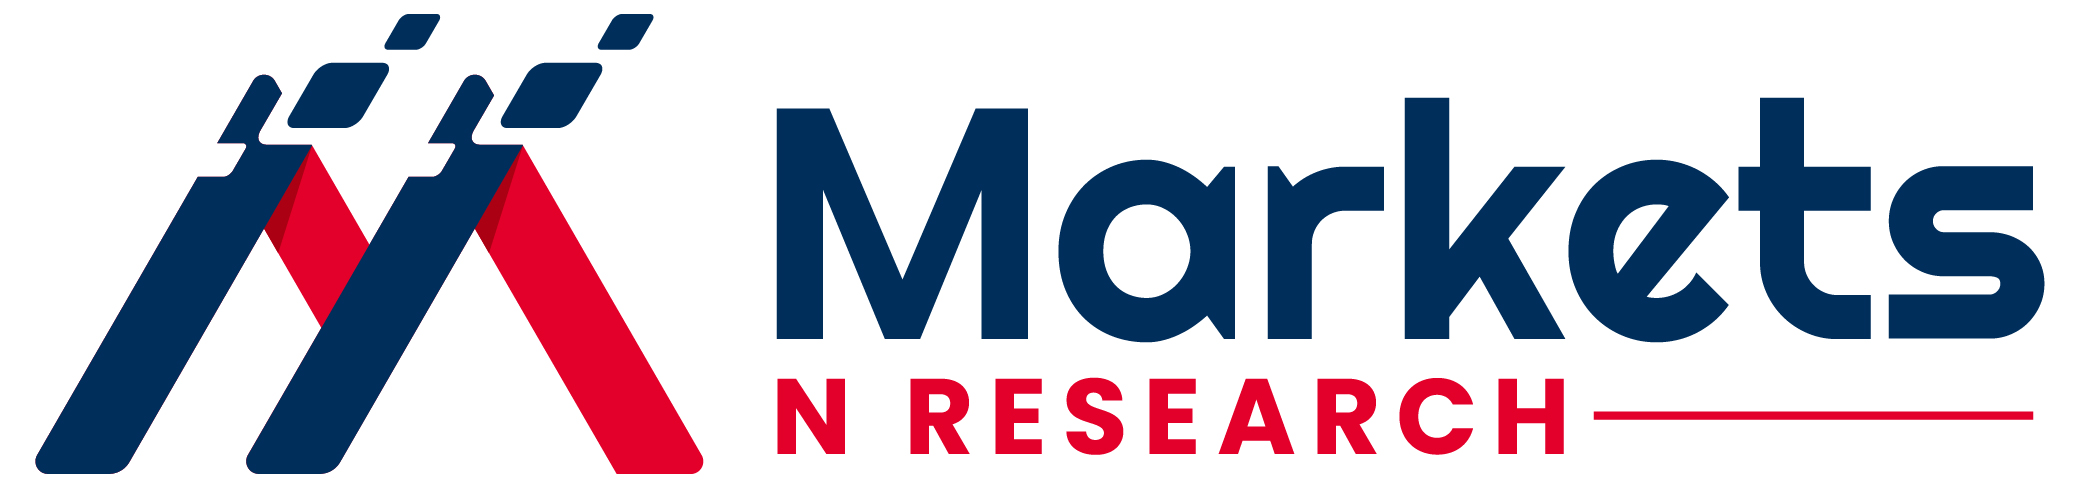 Steam Turbine Market Size/Share to Garner $17.7 Billion by 2028 at 2.20% CAGR | (Analysis, Outlook, Leaders, Trends, Forecast, Segmentation, Growth, Growth Rate, Value): Markets N Research